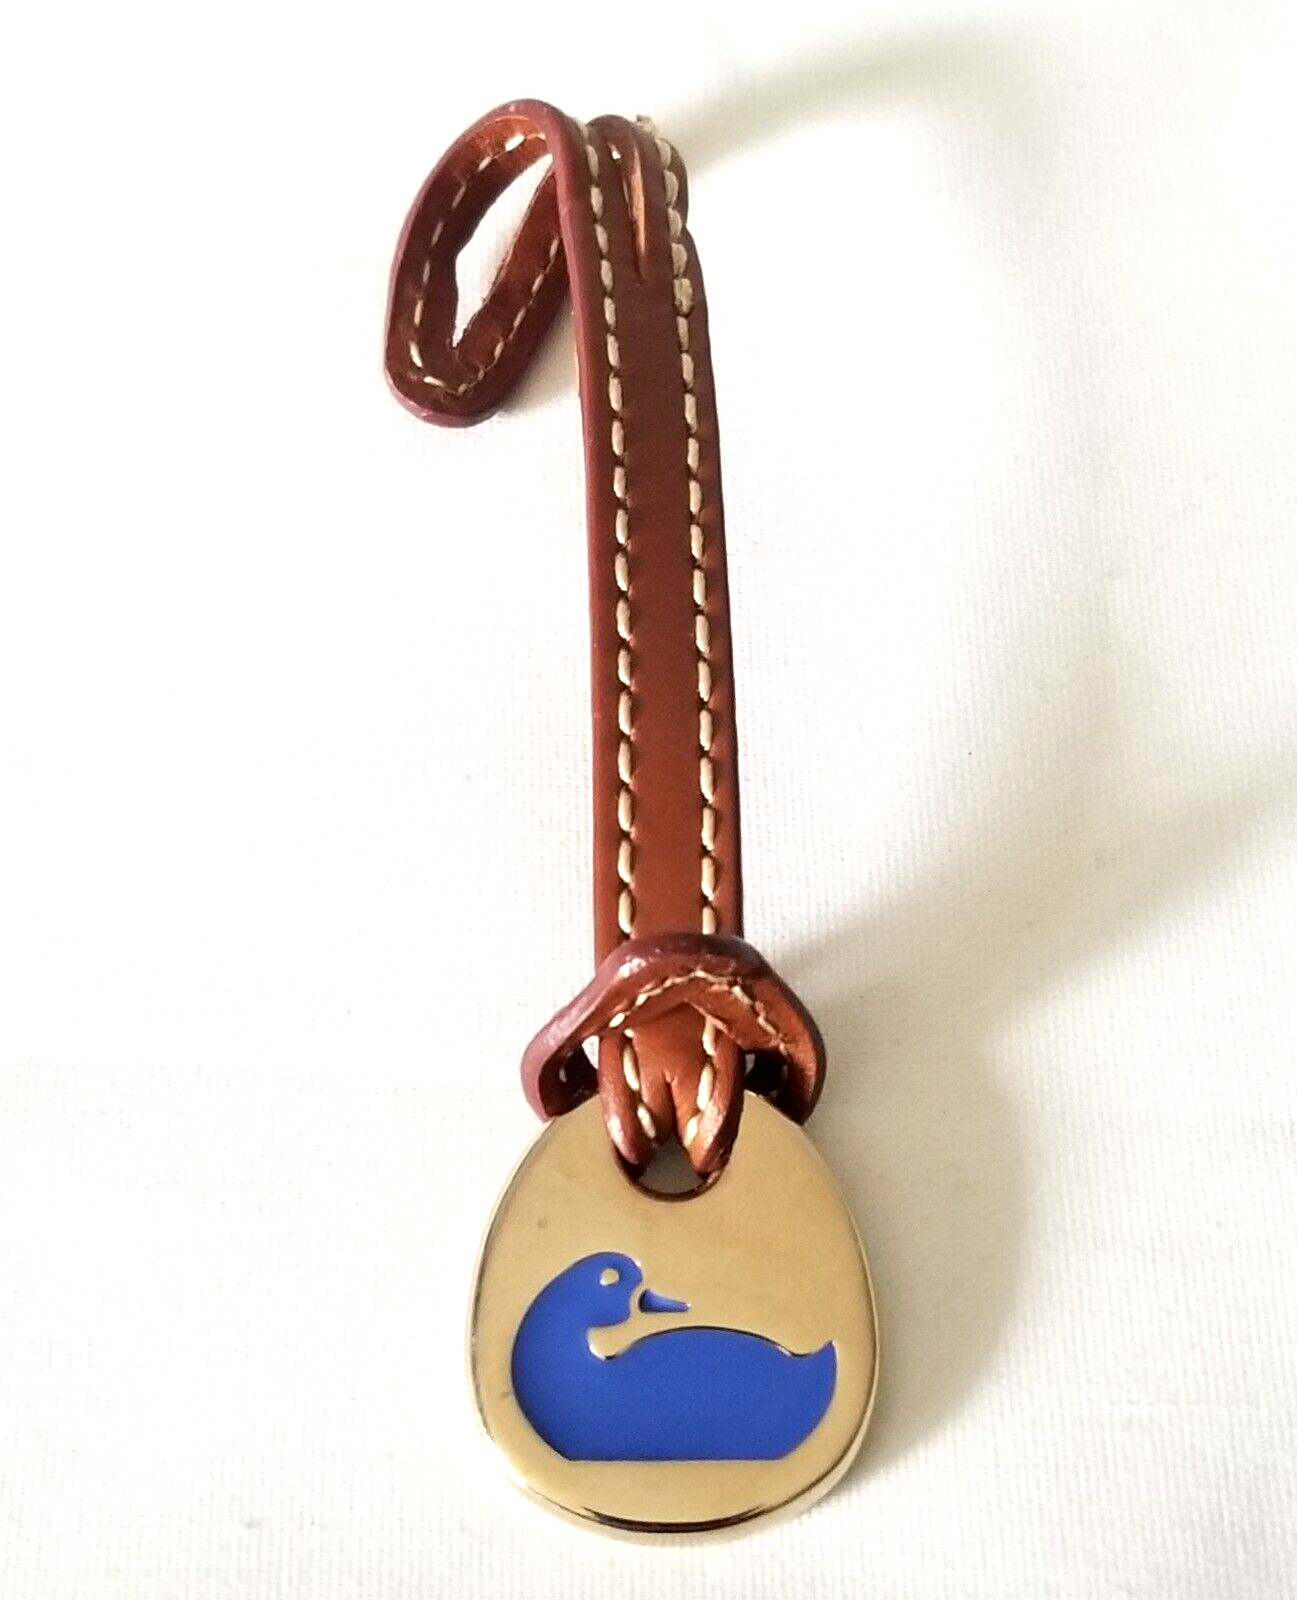 Primary image for Dooney & Bourke Blue Duck Gold Tone Metal Leather Bag Charm Replacement Key Fob